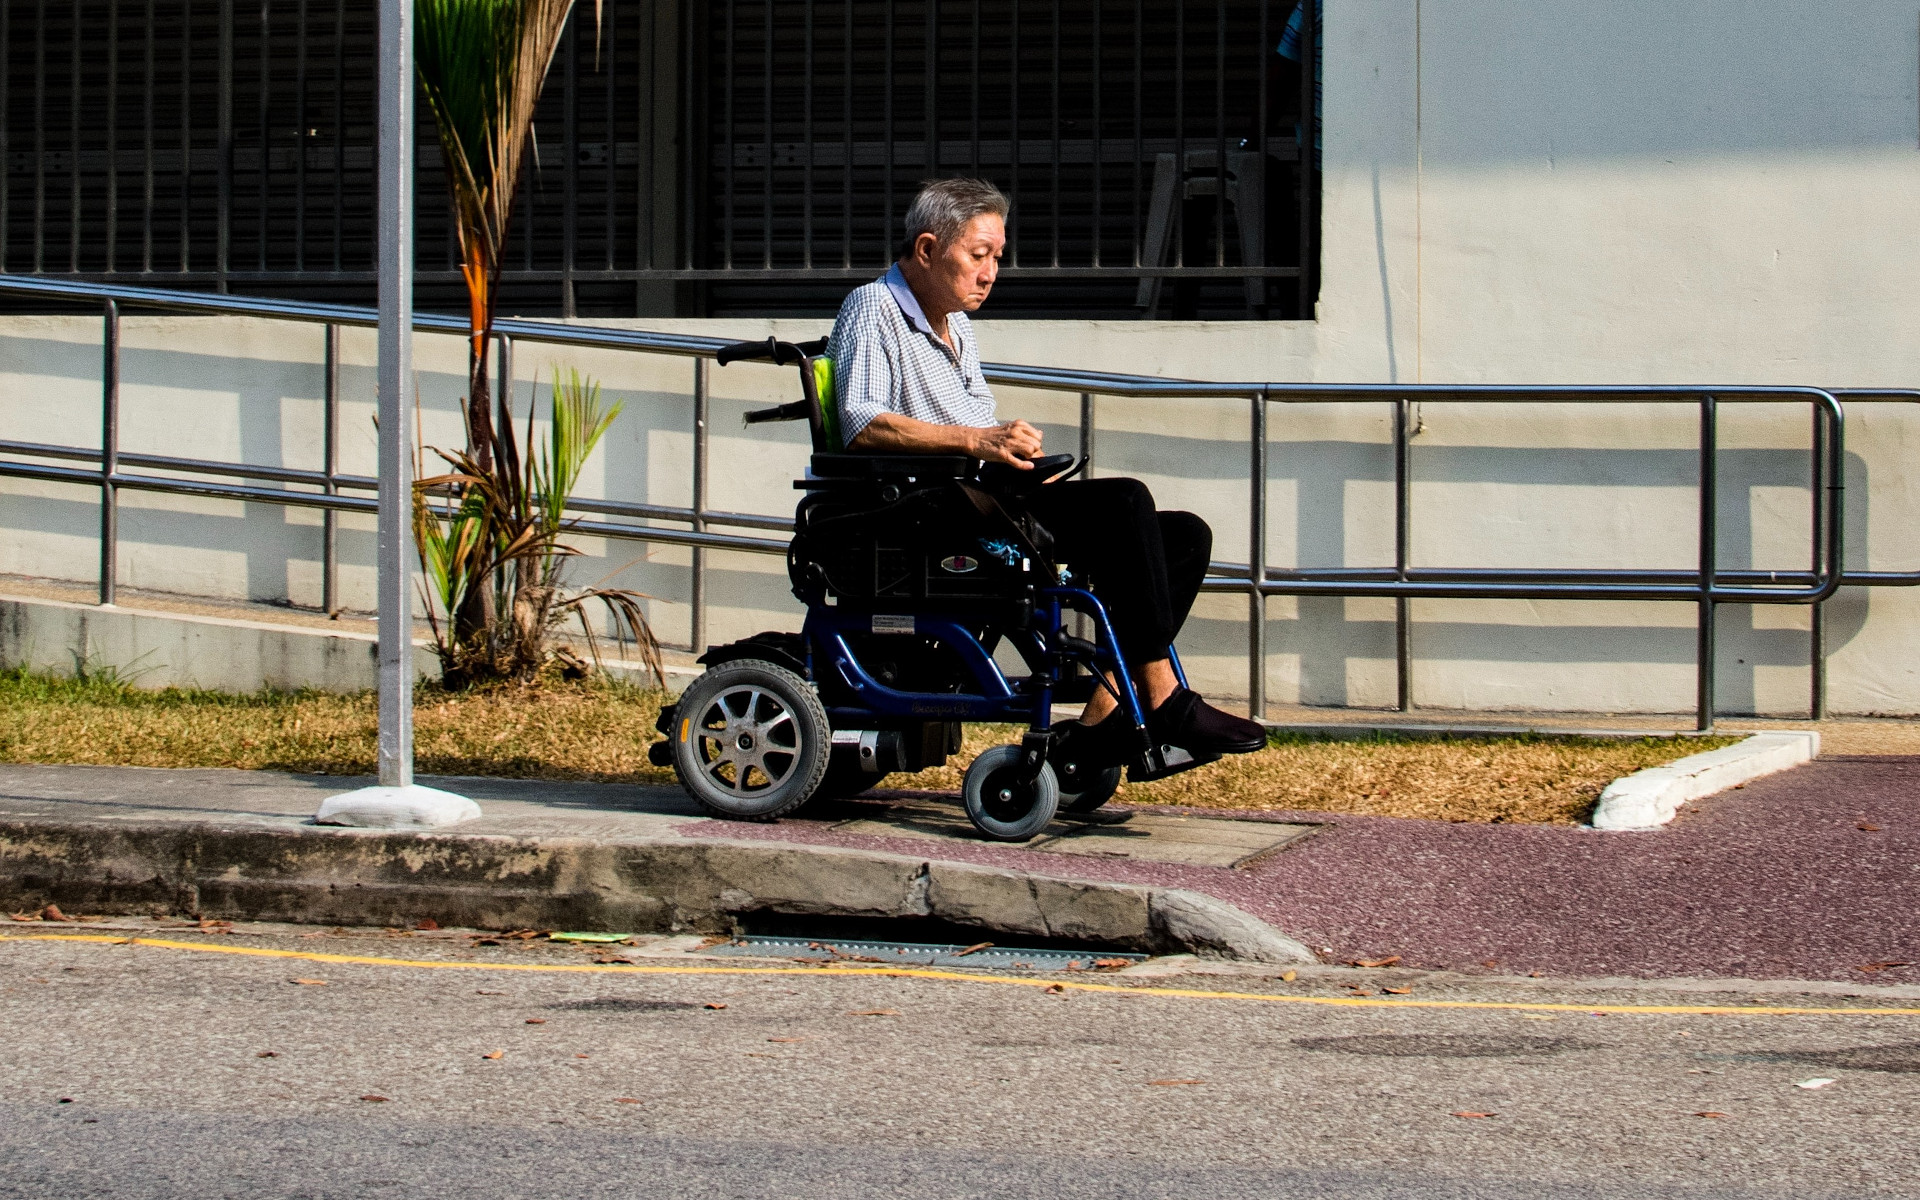 A wheelchair user can easily get around in the city thanks to lowered curbs and accessible sidewalks